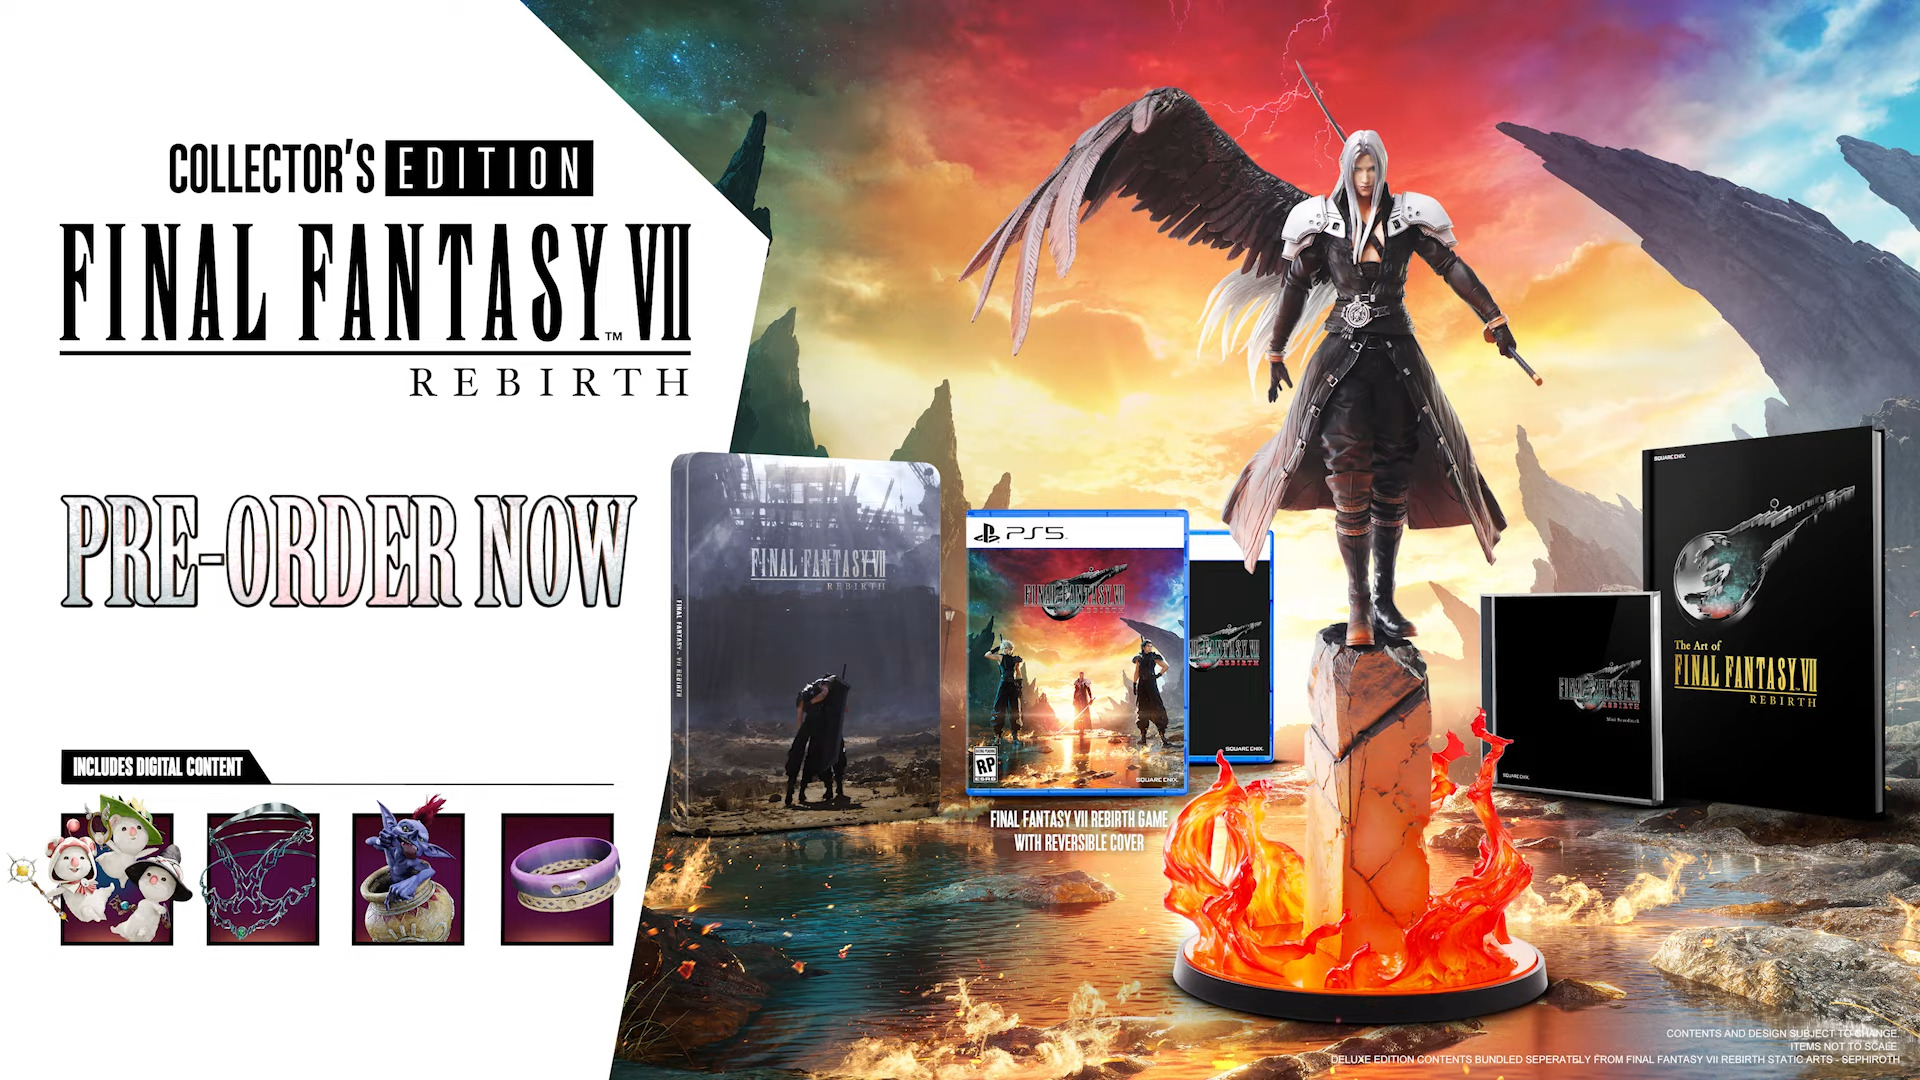 The Collector's Edition of Final Fantasy VII Rebirth includes includes a mini-soundtrack CD, artbook, steelbook case, the Summoning Materia DLC, the Reclaimant Choker armor, the Orchid Braclet armor, and a high detailed collectible statue of Sephiroth